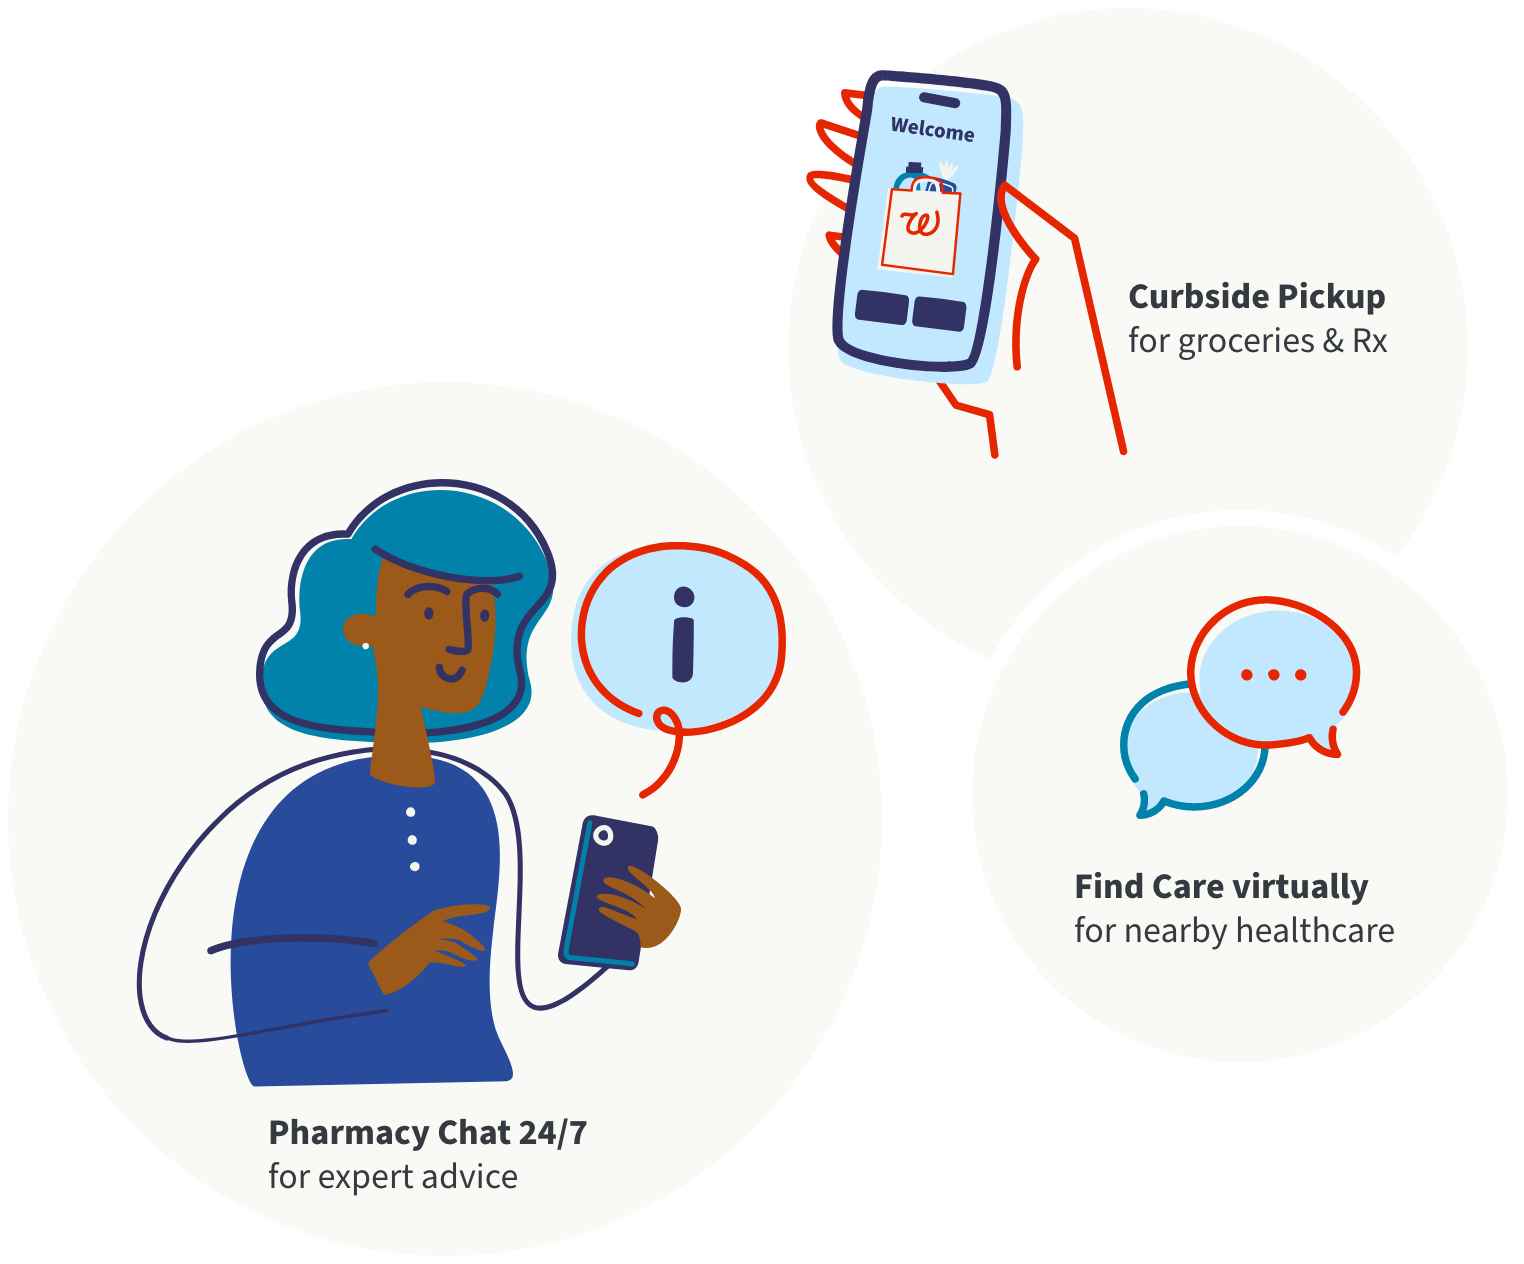 Curbside Pickup for groceries & Rx, Pharmacy Chat 24/7 for expert advice, Find Care virtually for nearby healthcare.